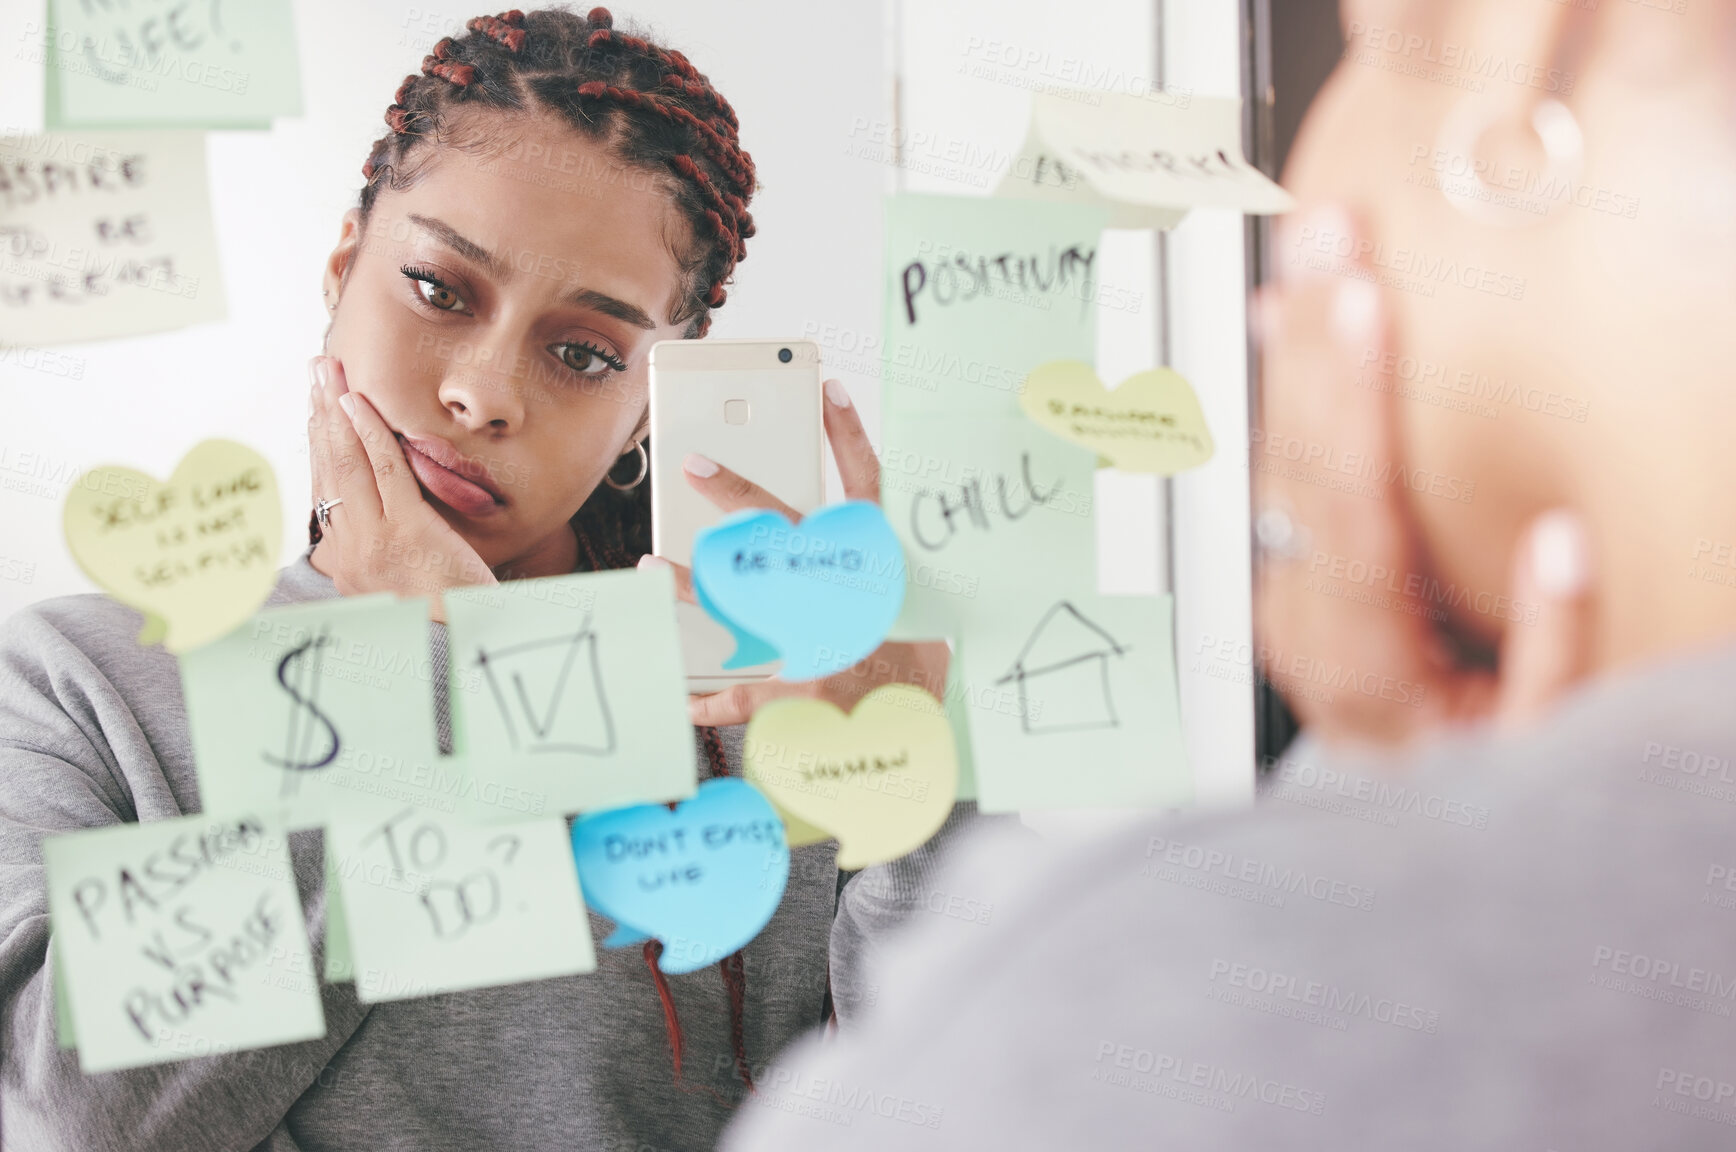 Buy stock photo Sad, depression and anxiety woman selfie with phone and reading sticky notes on a mirror in a room. Upset and unhappy girl reading motivational, positive affirmation and self care post it reminder.